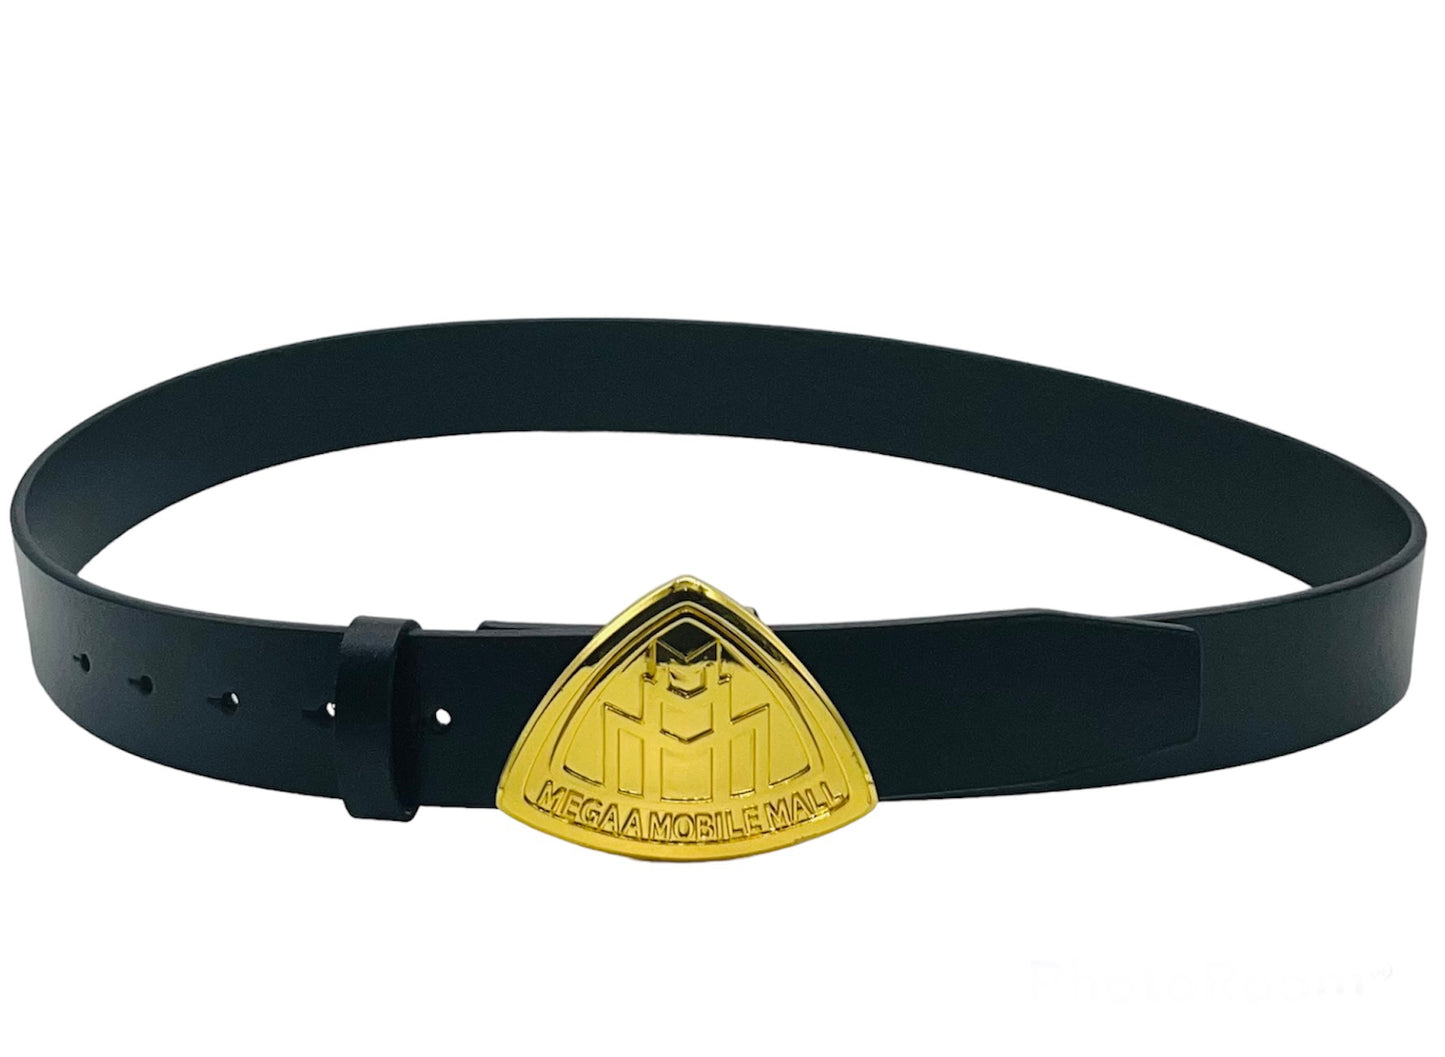 triple m megaamobilemall black leather belt with gold buckle